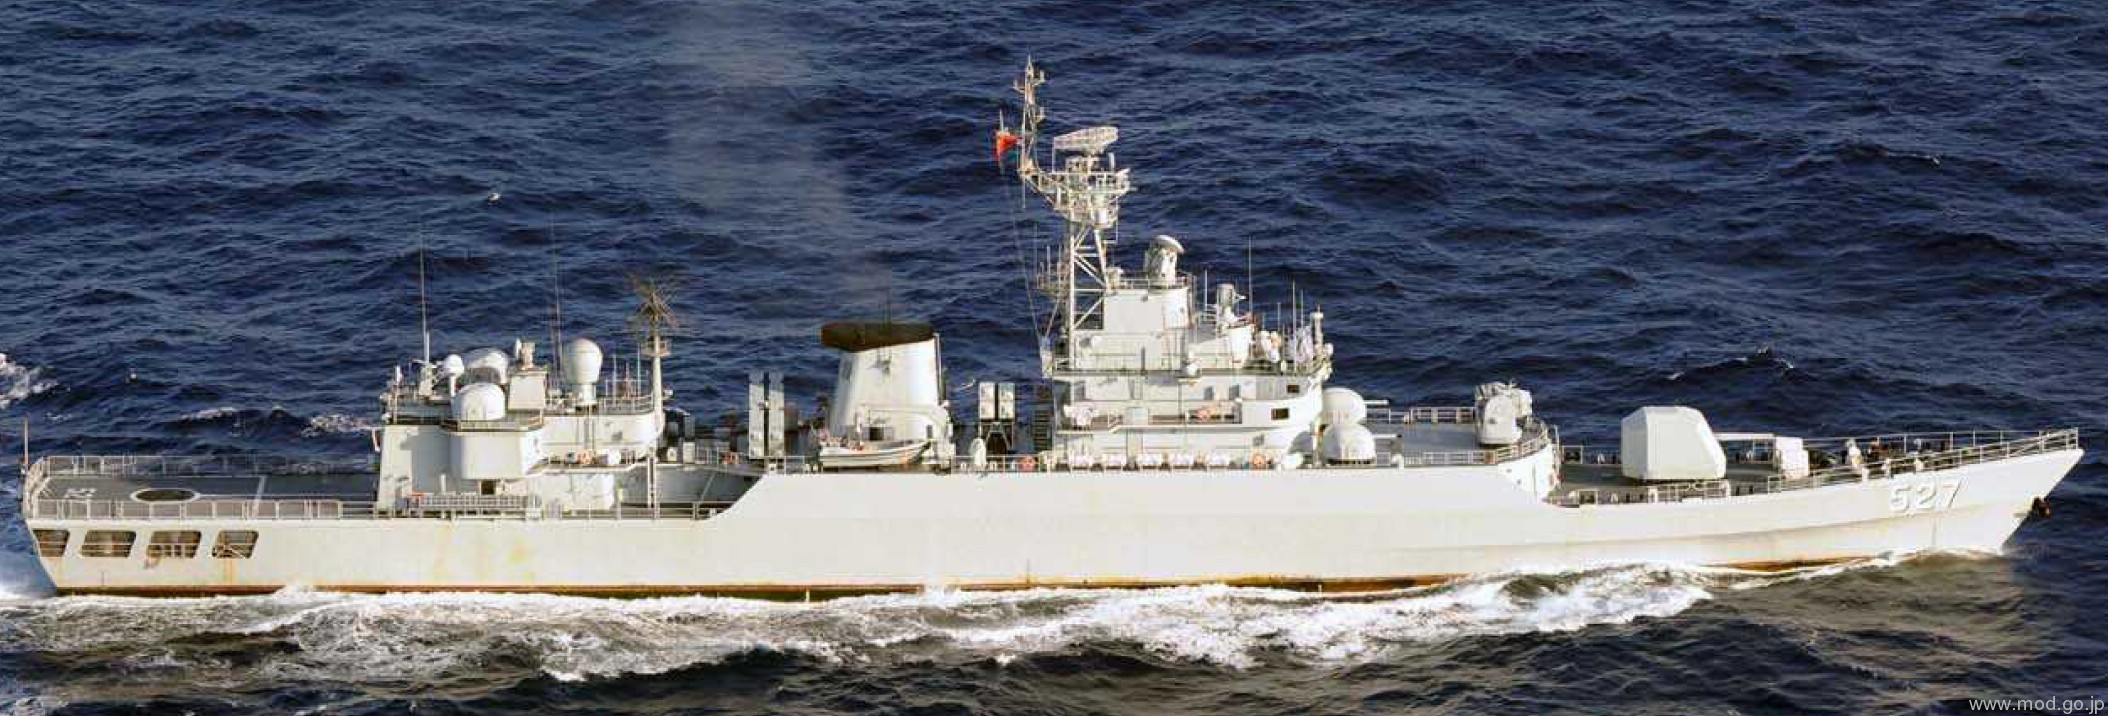 ffg-527 plans luoyang type 053h3 jiangwei ii class guided missile frigate people's liberation army navy china 02